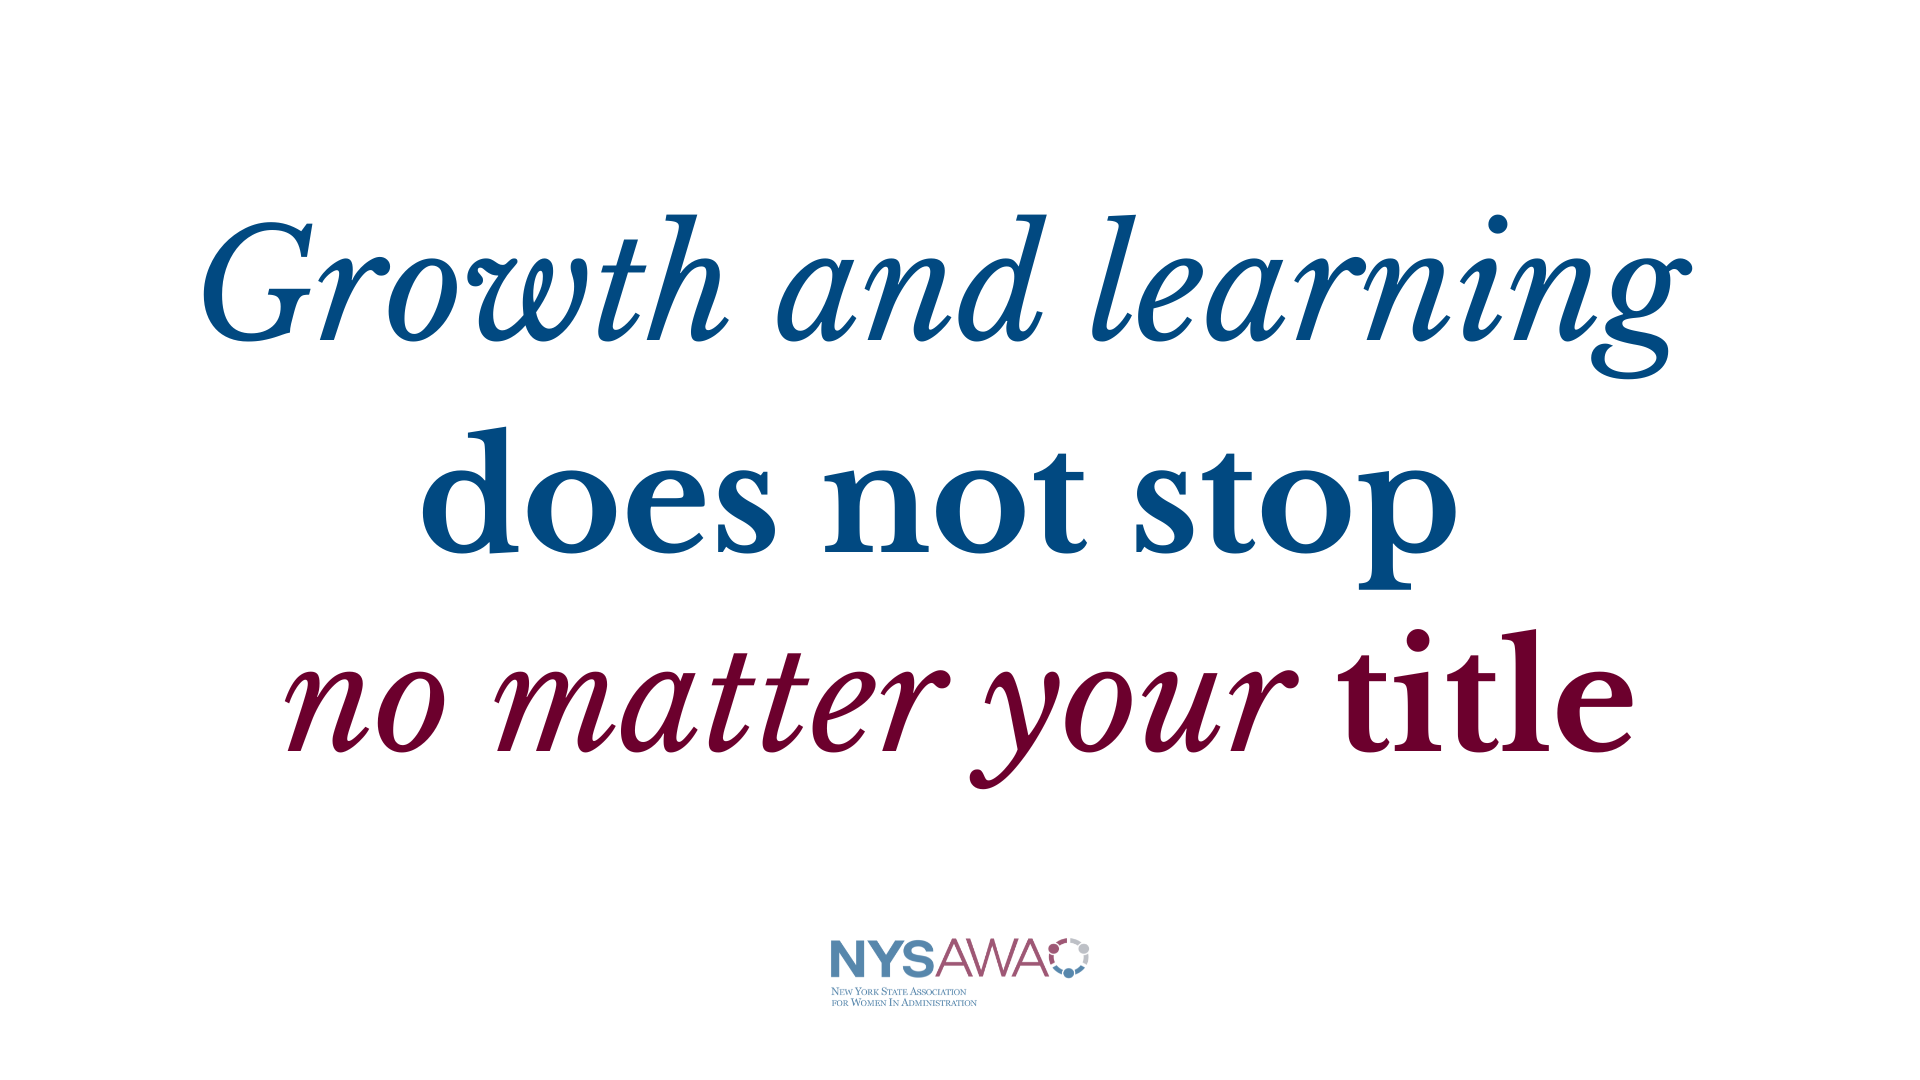 Growth and learning does not stop no matter your title